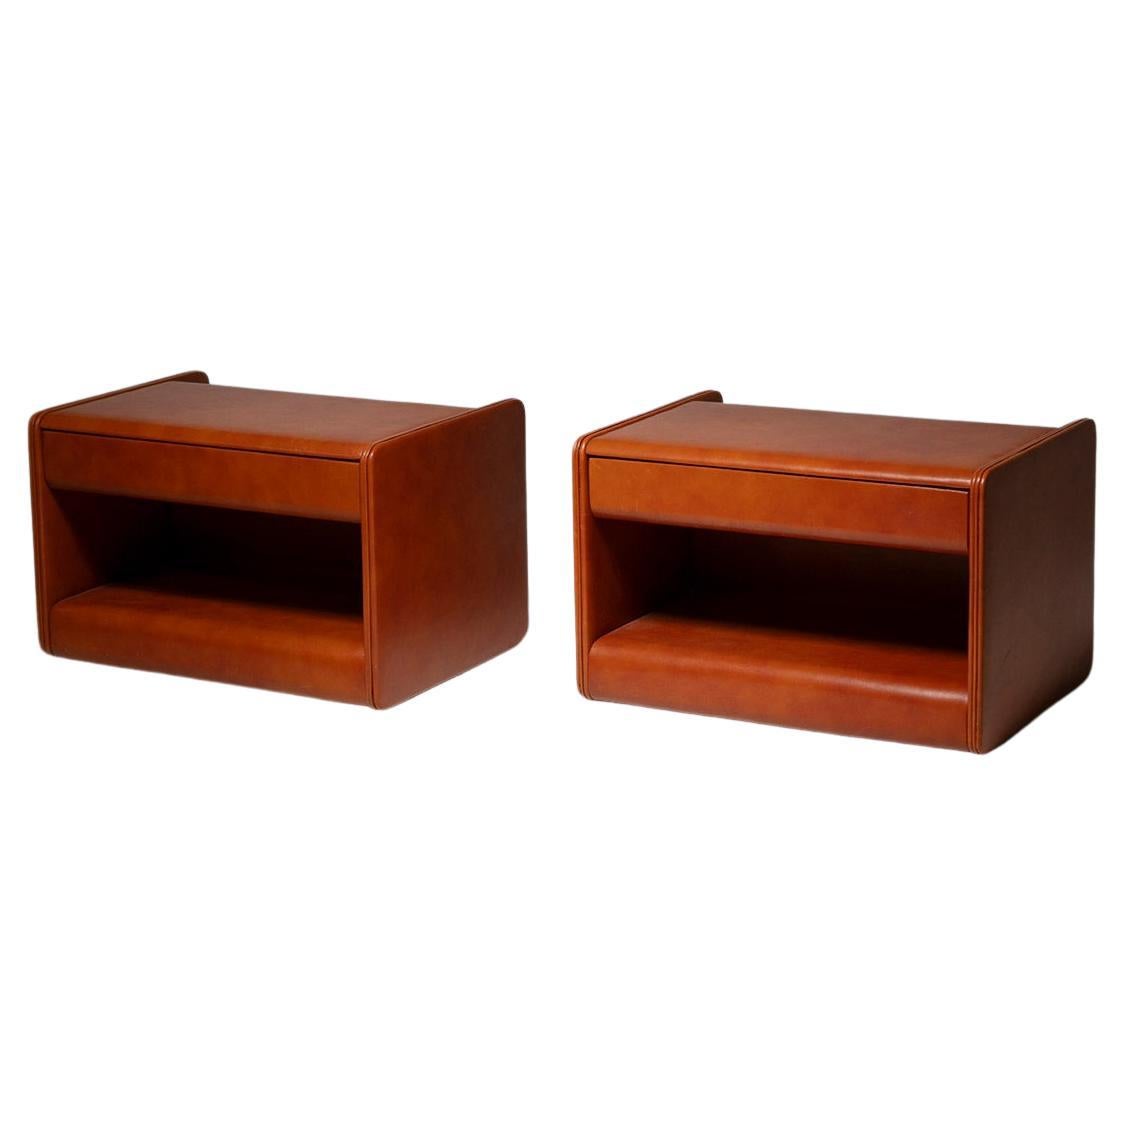 Pair of Leather Night Stands by Luigi Massoni for Poltrona Frau, Italy, 1960s For Sale